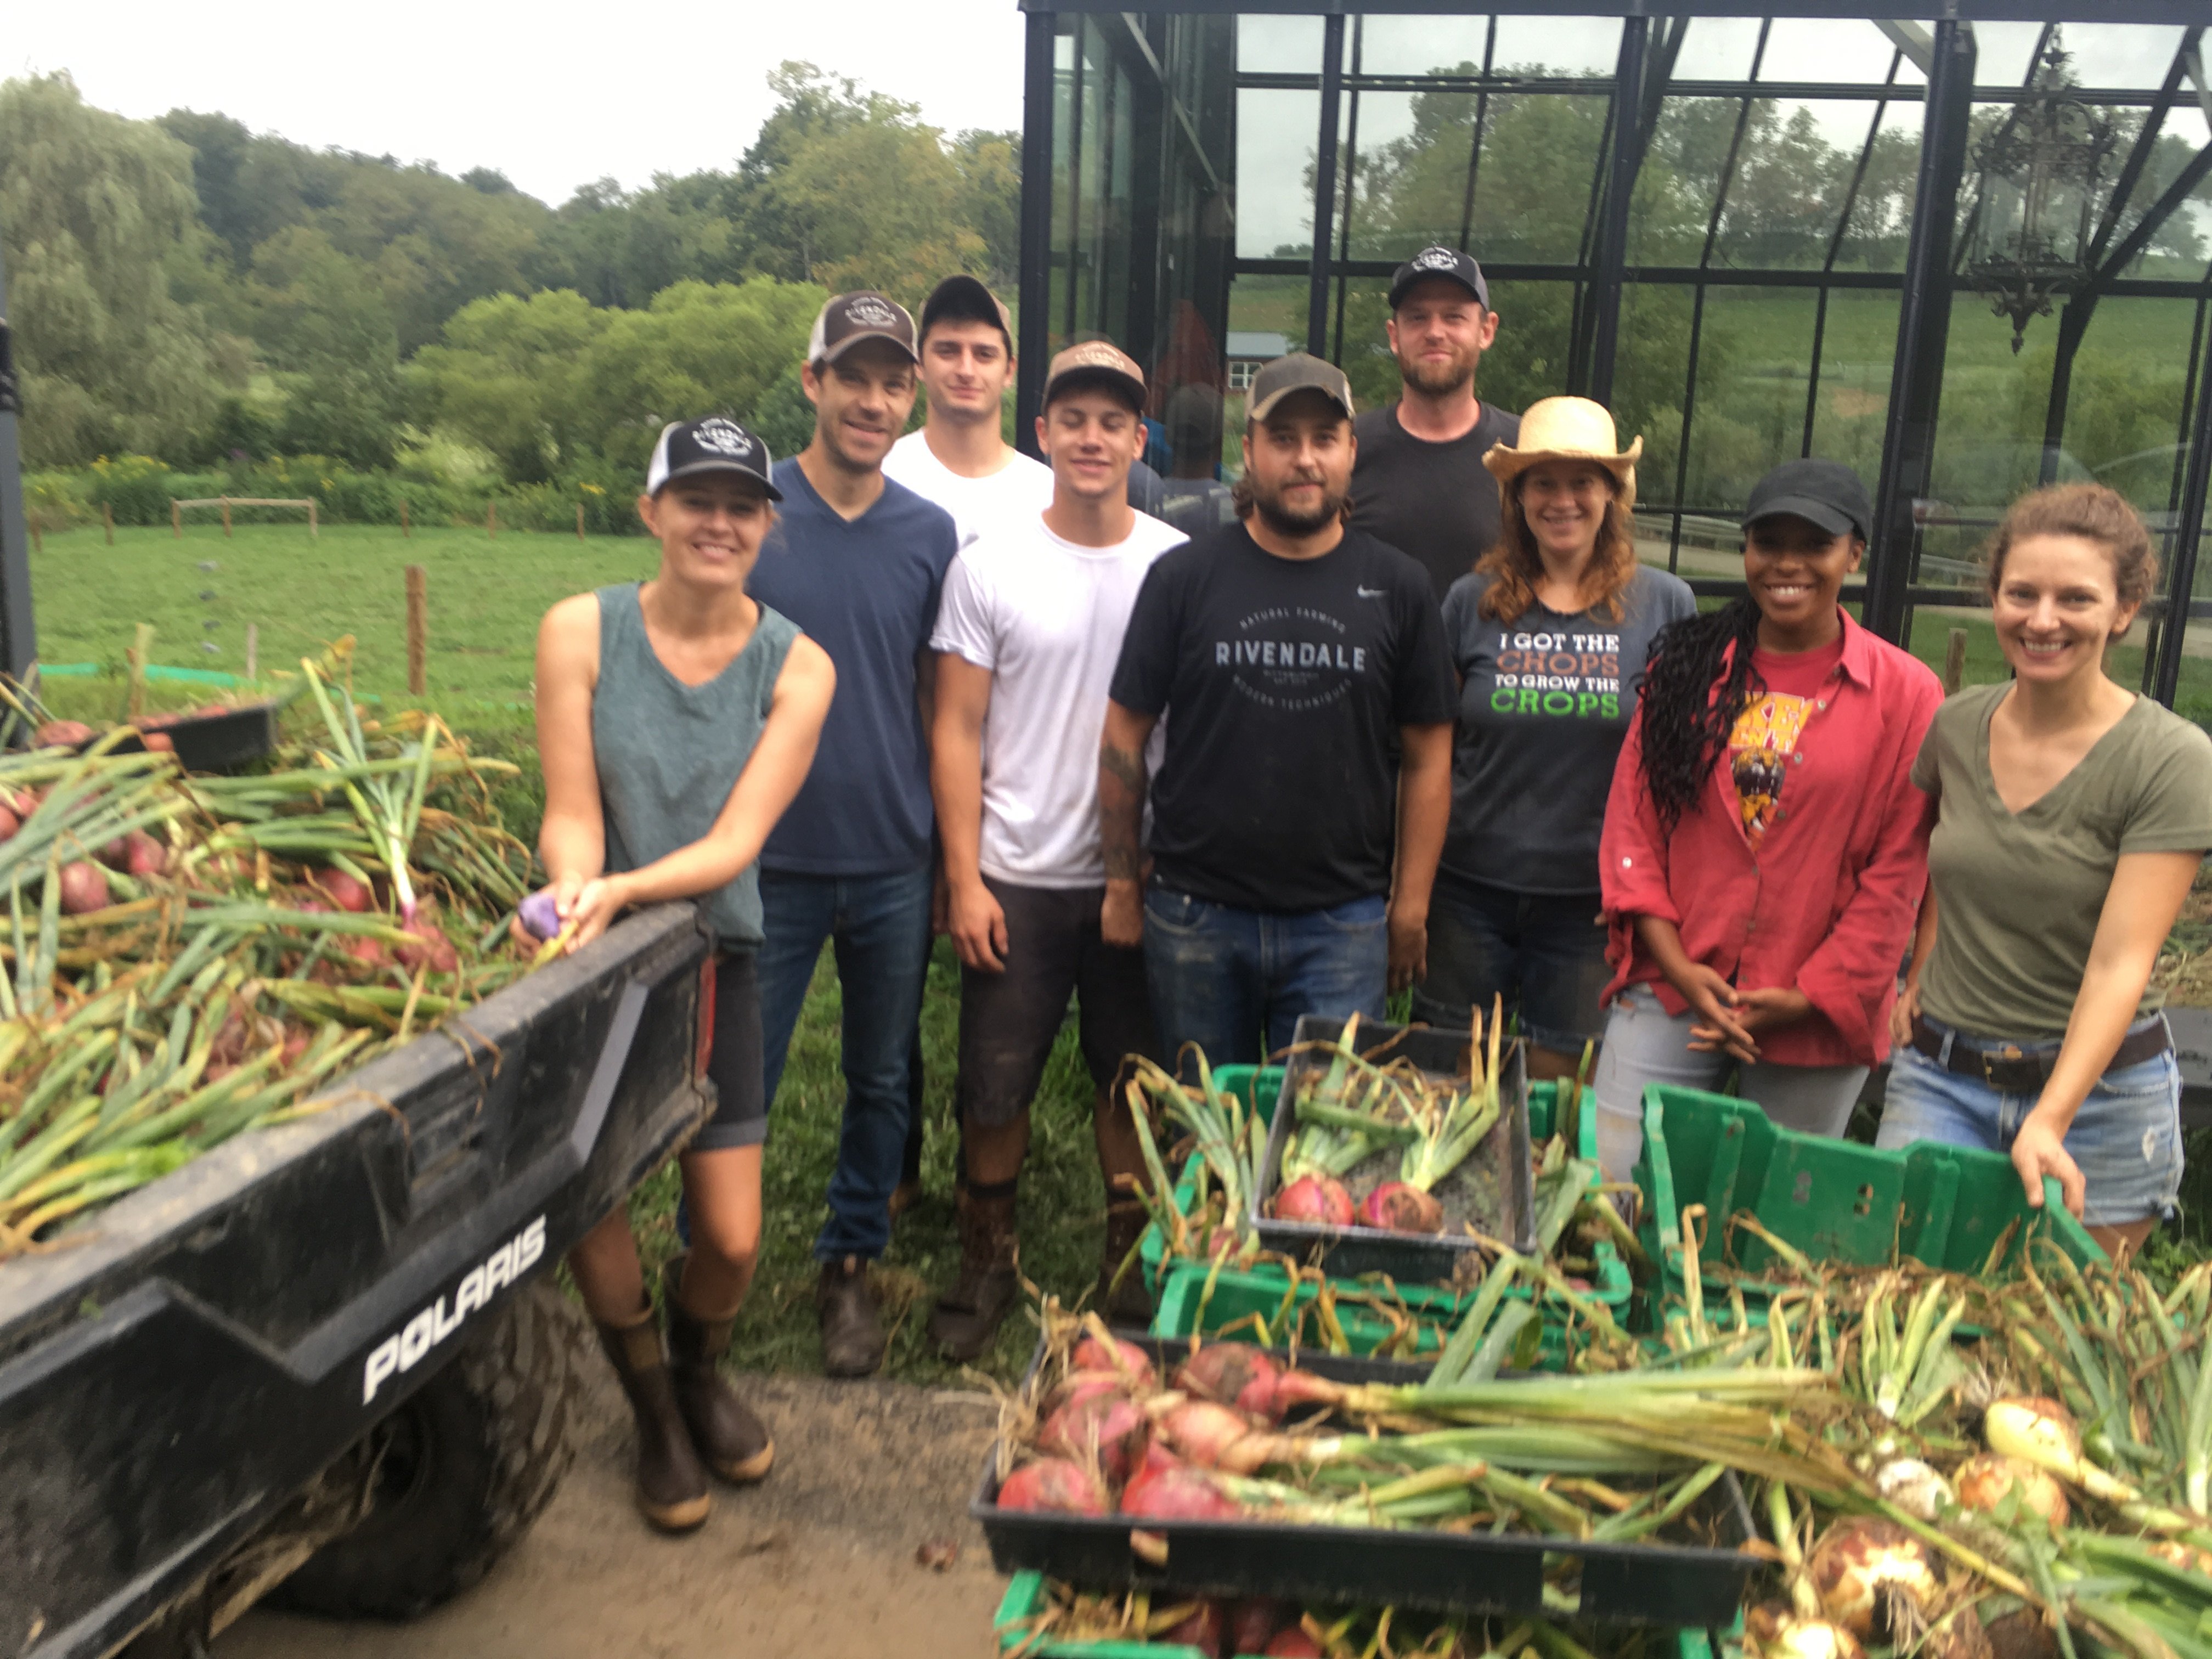 Previous Happening: Rivendale Farms CSA Newsletter, Week 10 (August 14)